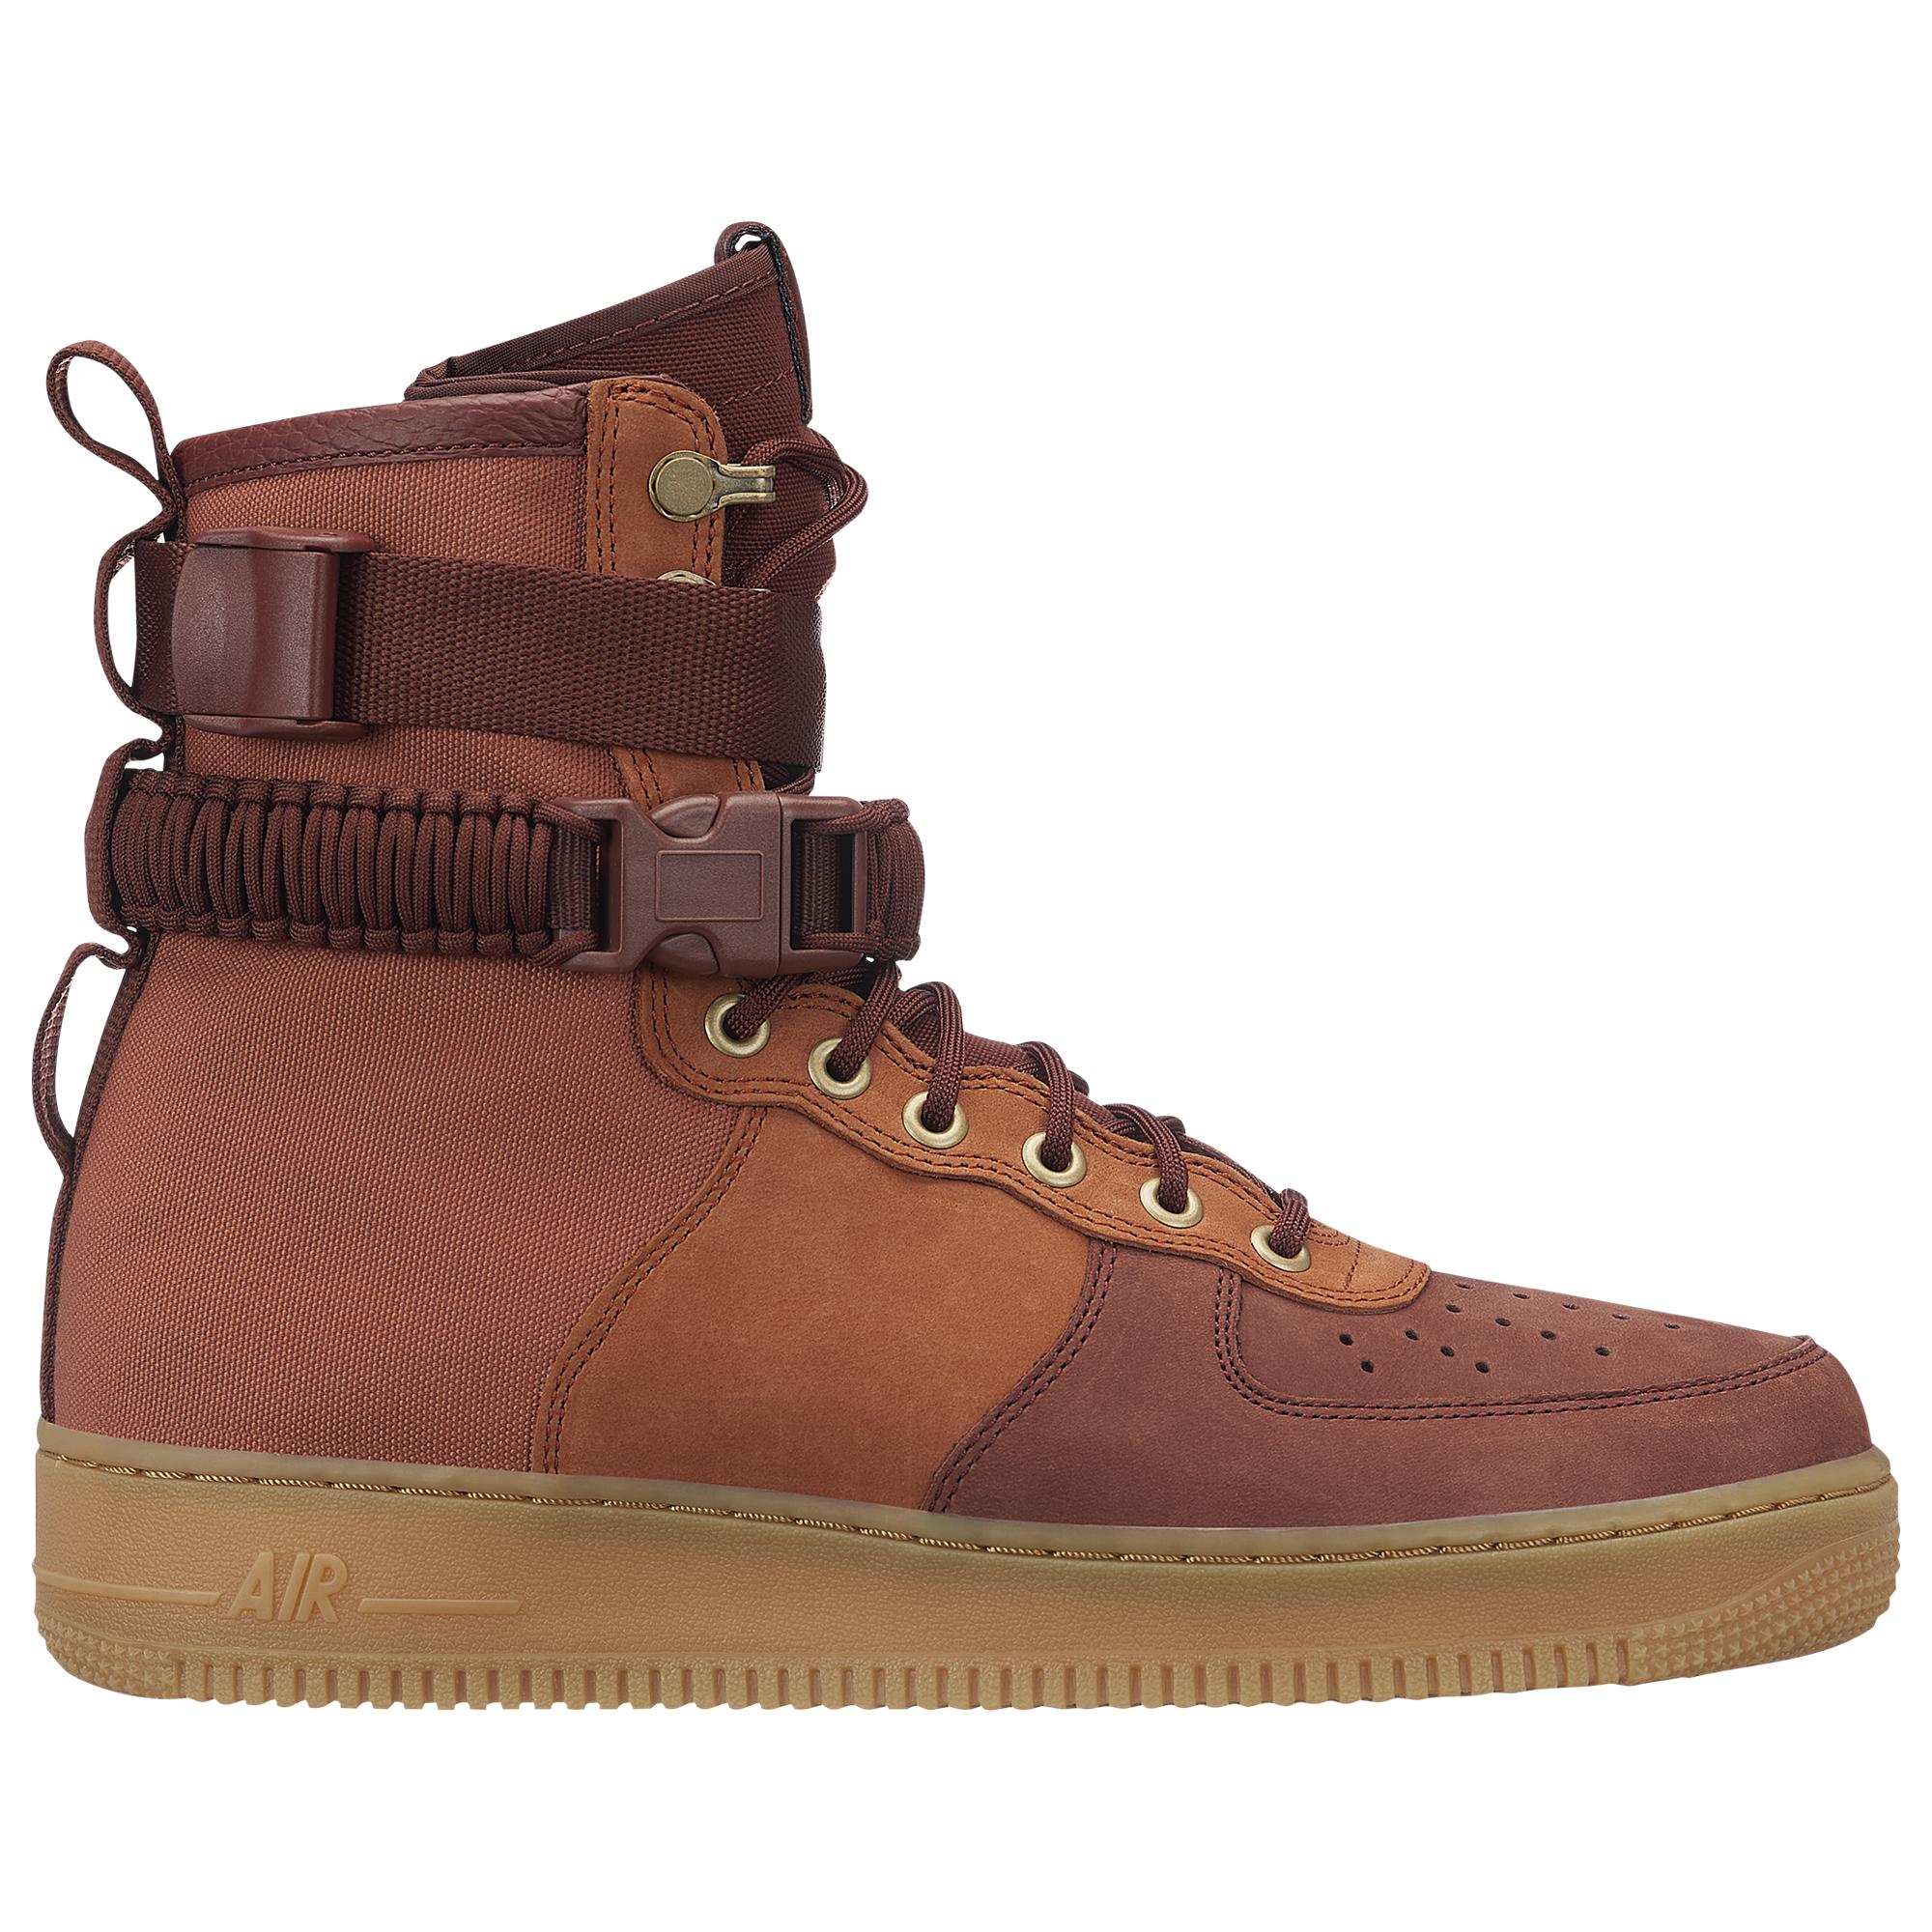 Nike Synthetic Sf Af1 Prm Sneakers in Brown for Men - Lyst